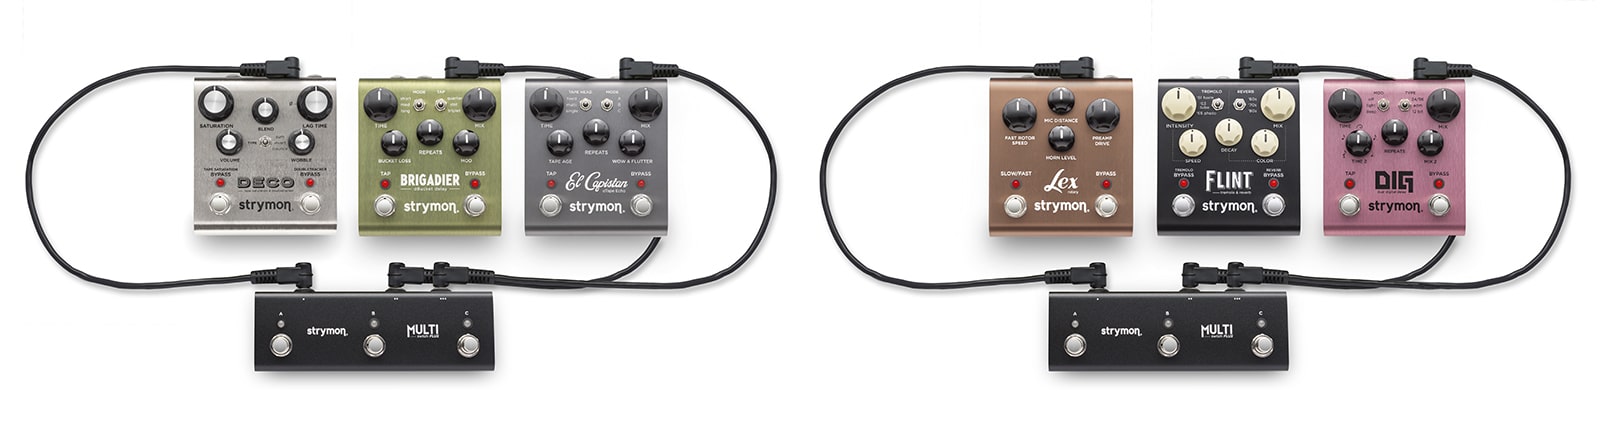 MultiSwitch Plus Extended Control Switch - Strymon